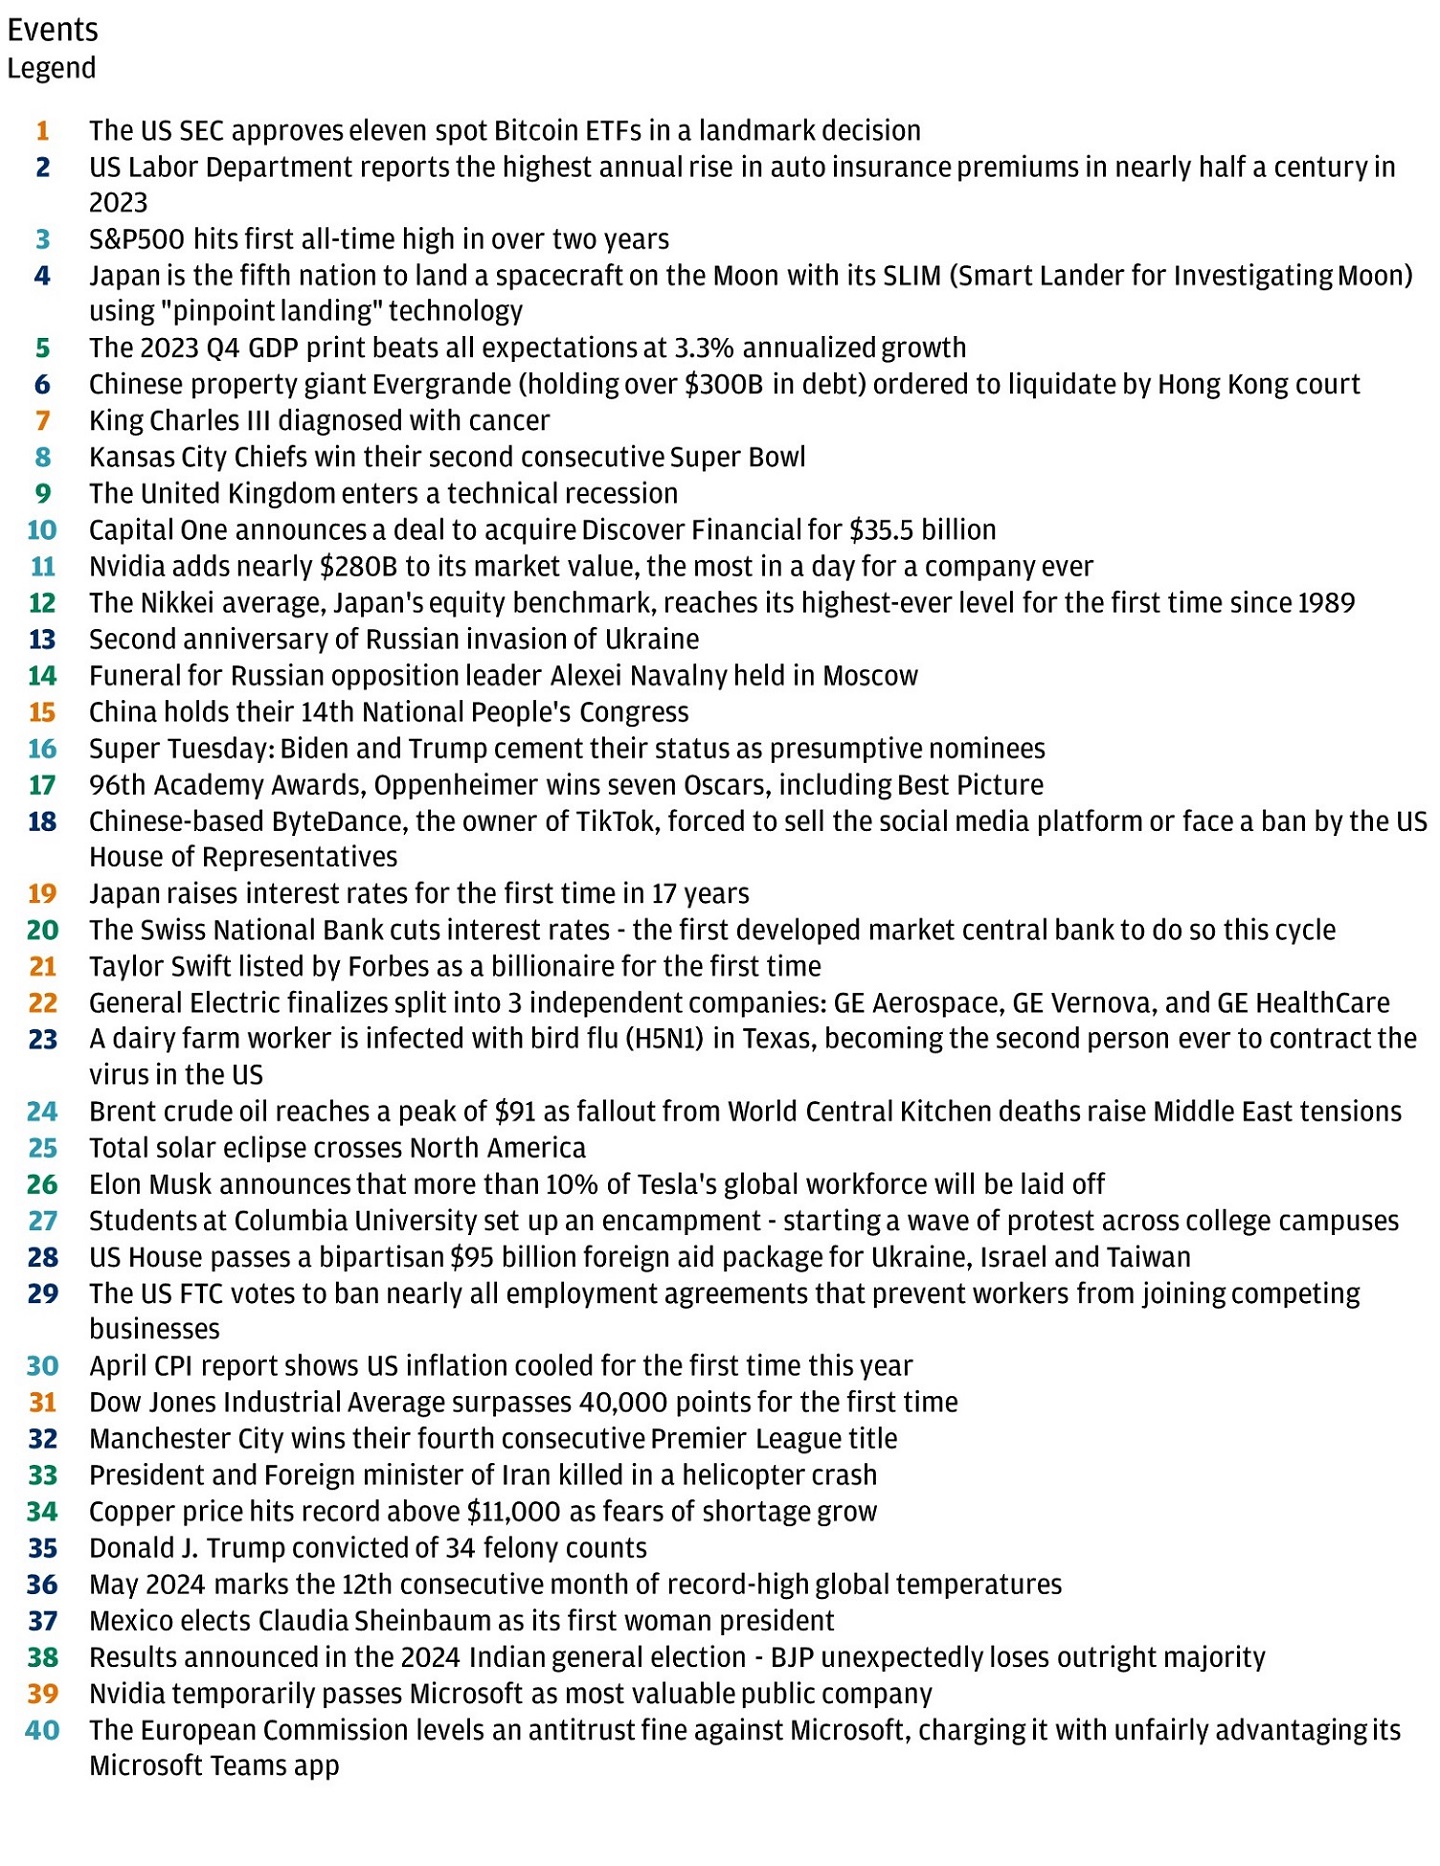 This table shows 40 important events that took place during the first six months of 2024 in chronological order.